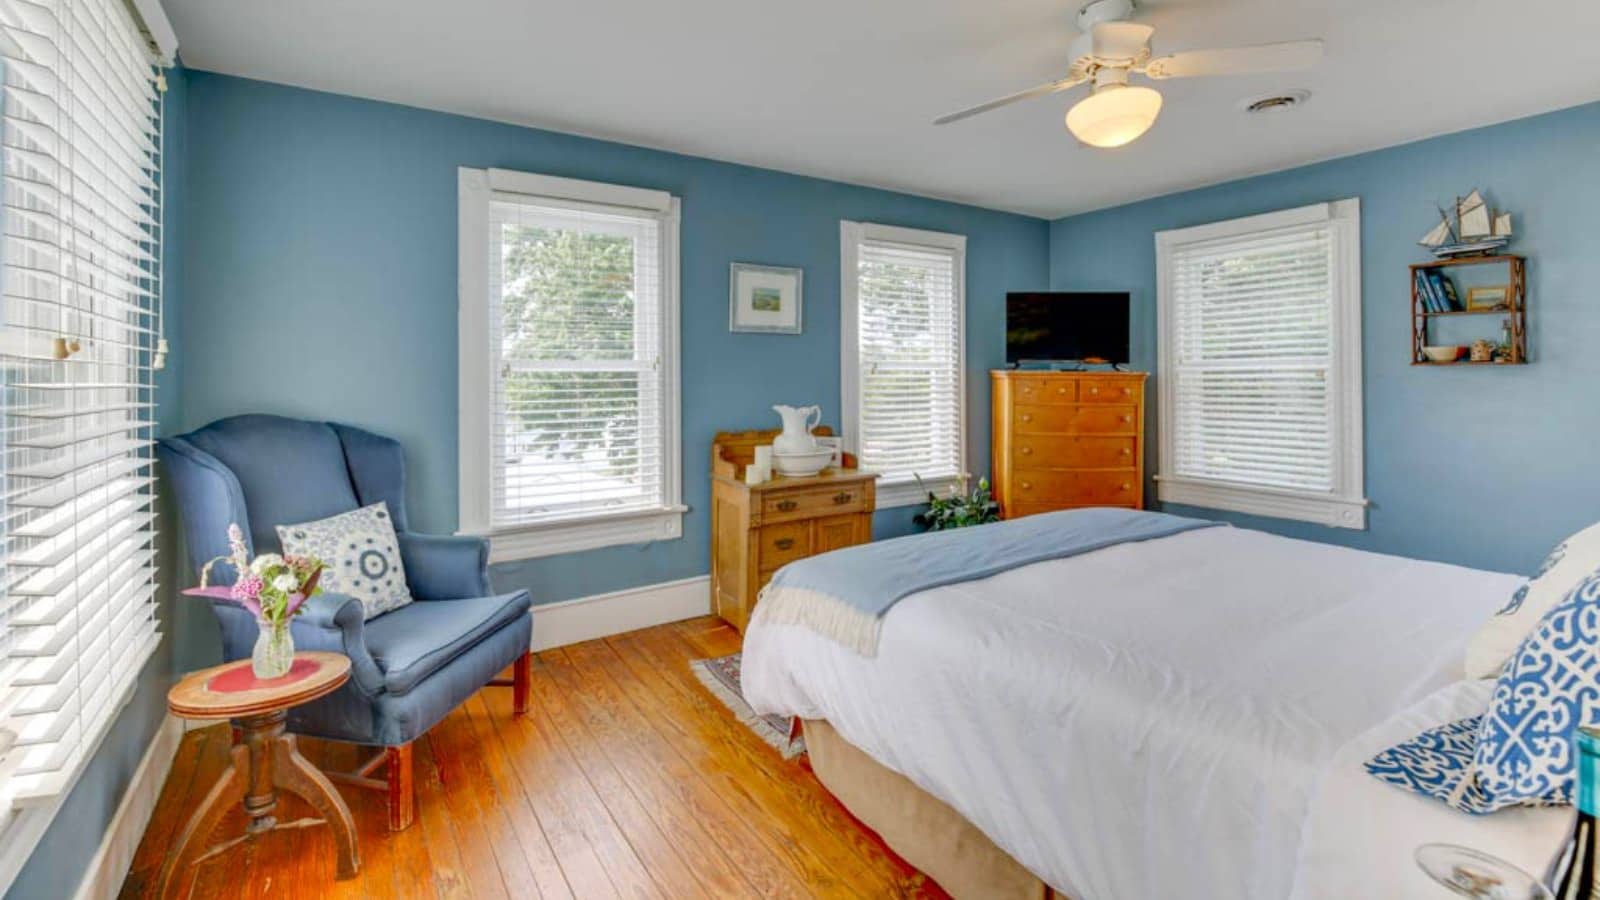 Bedroom with blue walls, hardwood flooring, bed with white bedding, blue upholstered armchair, and wooden dresser